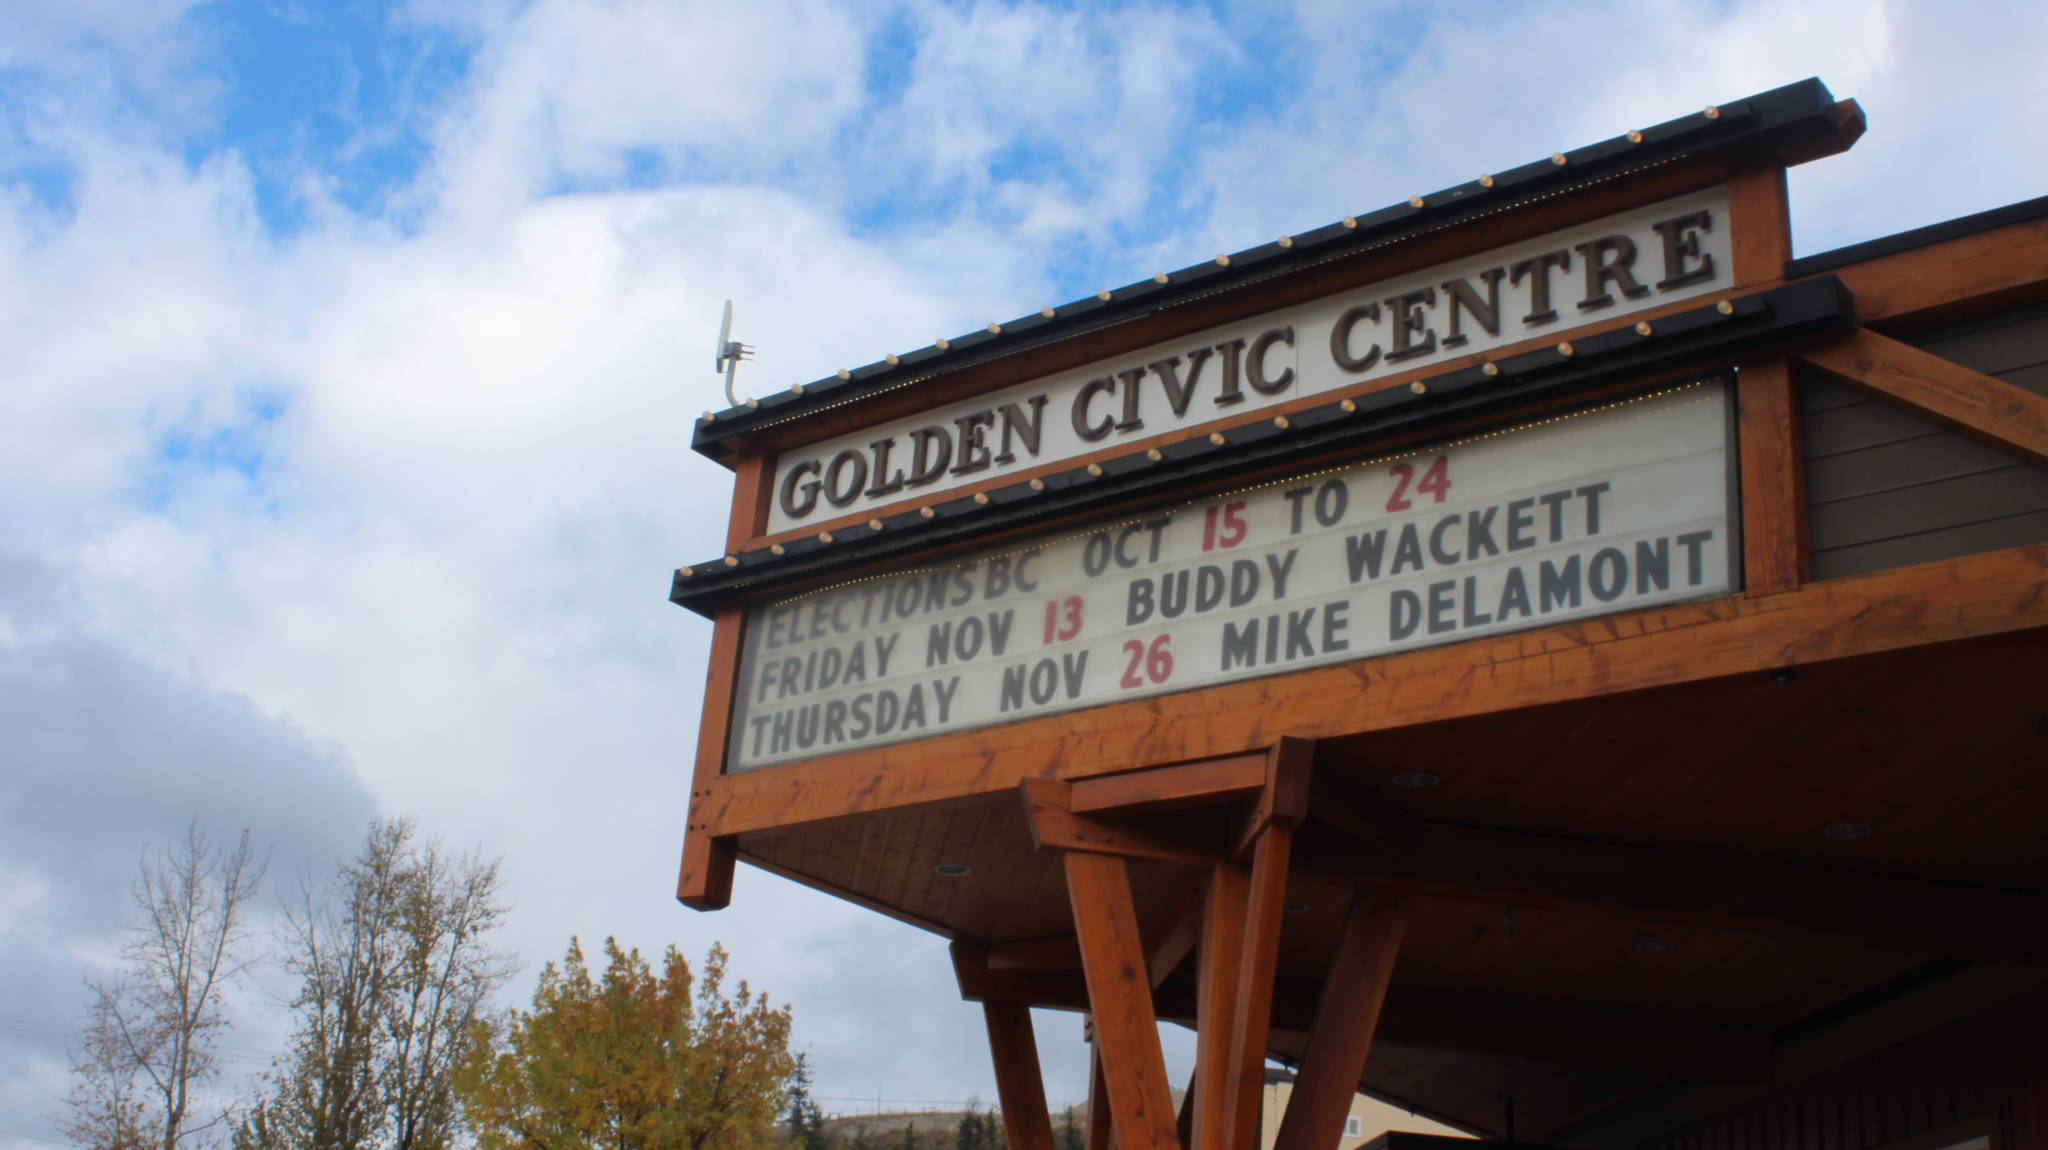 Voters can head to the Civic Centre until 9 p.m. local time to cast their ballot. (Claire Palmer photo)